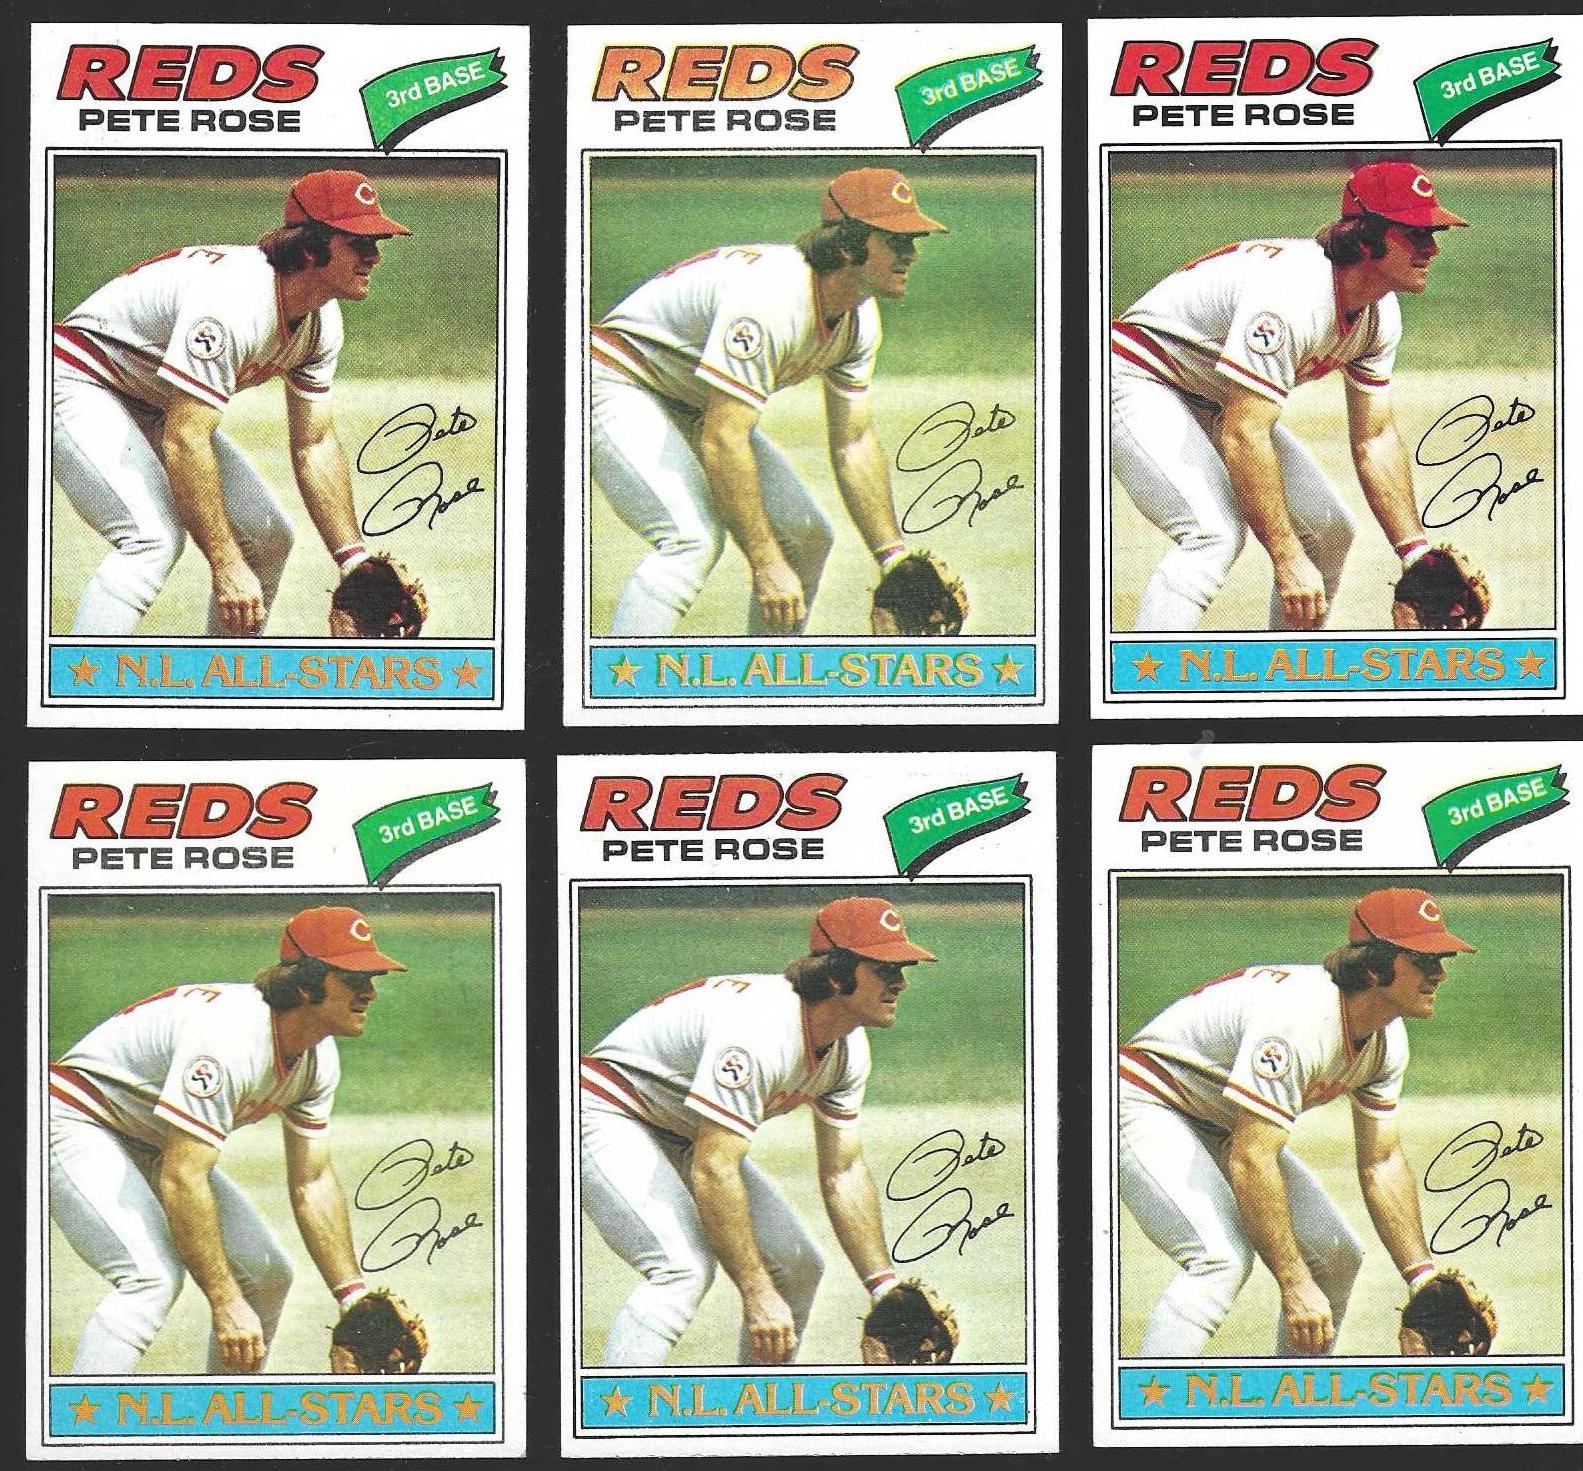 1977 Topps #450 Pete Rose (Reds) Baseball cards value